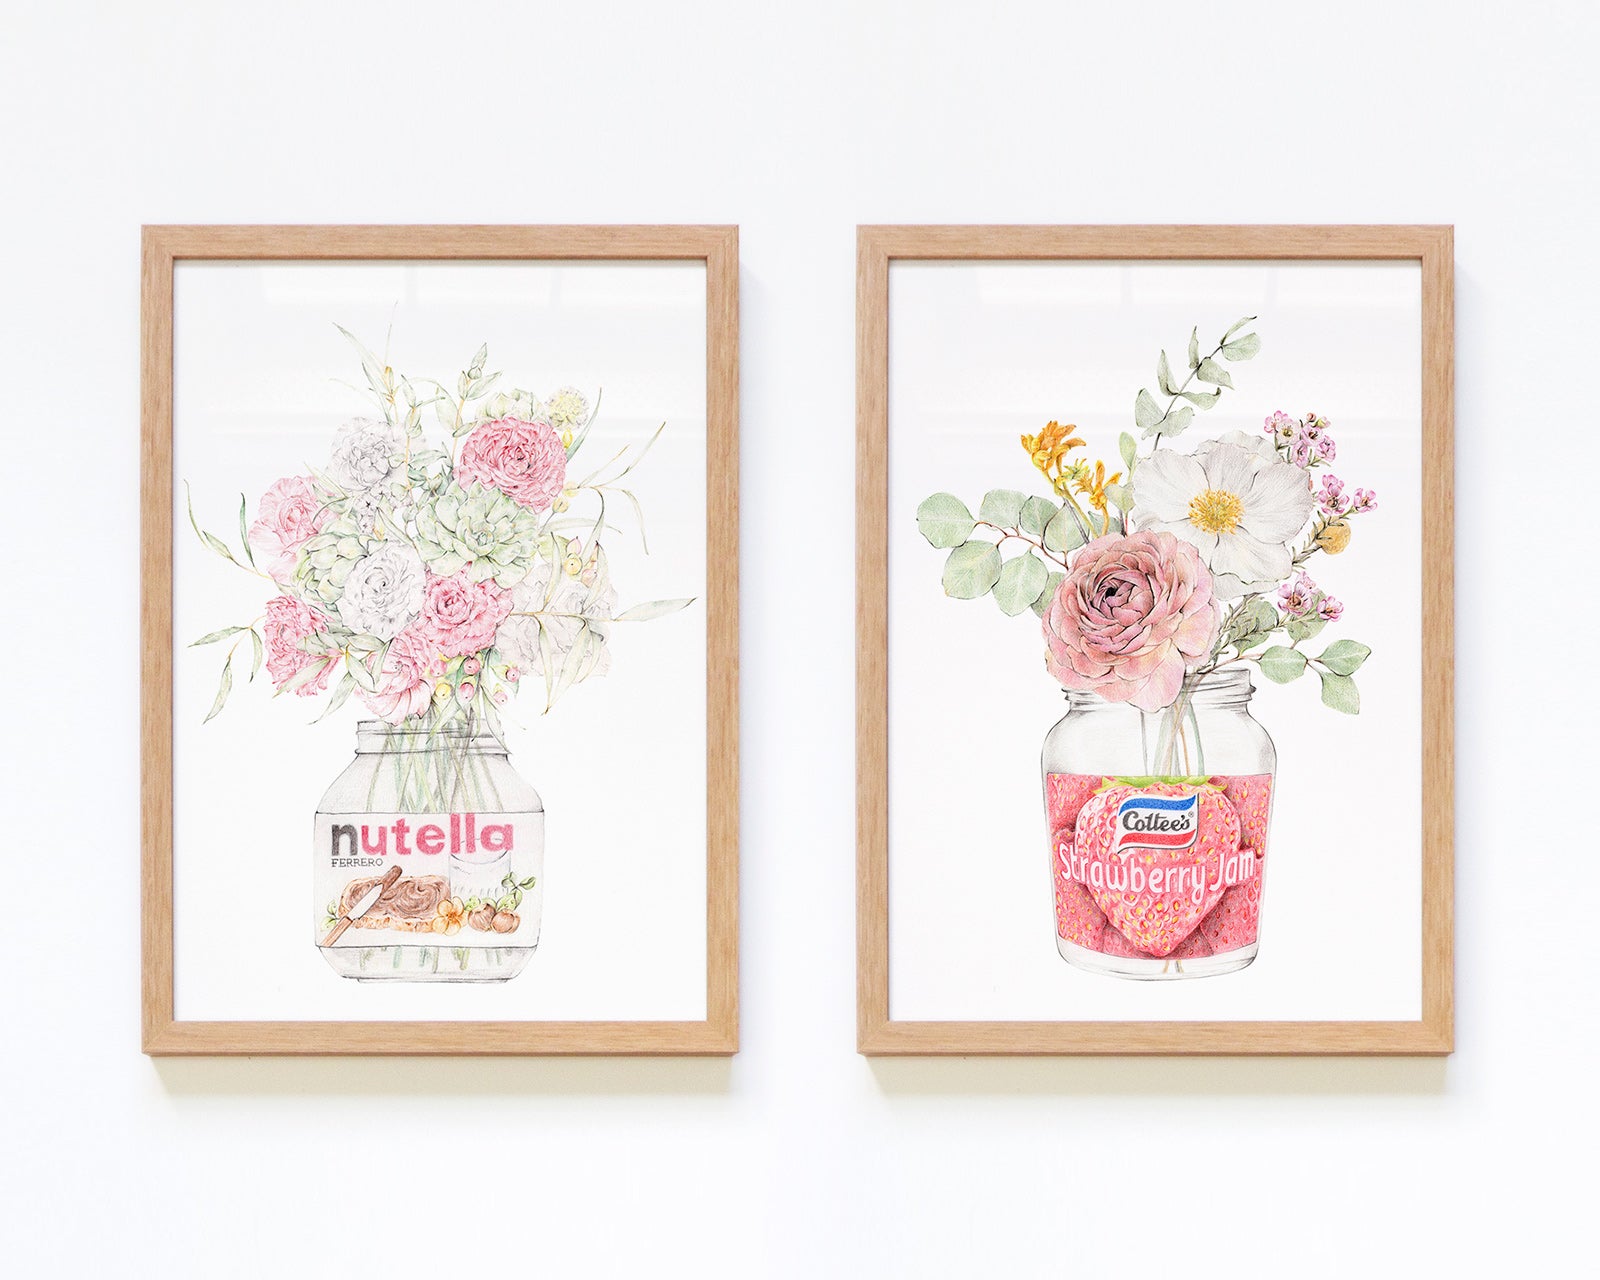 Framed Set Of 2 Art Prints with Nutella and Strawberry Jam